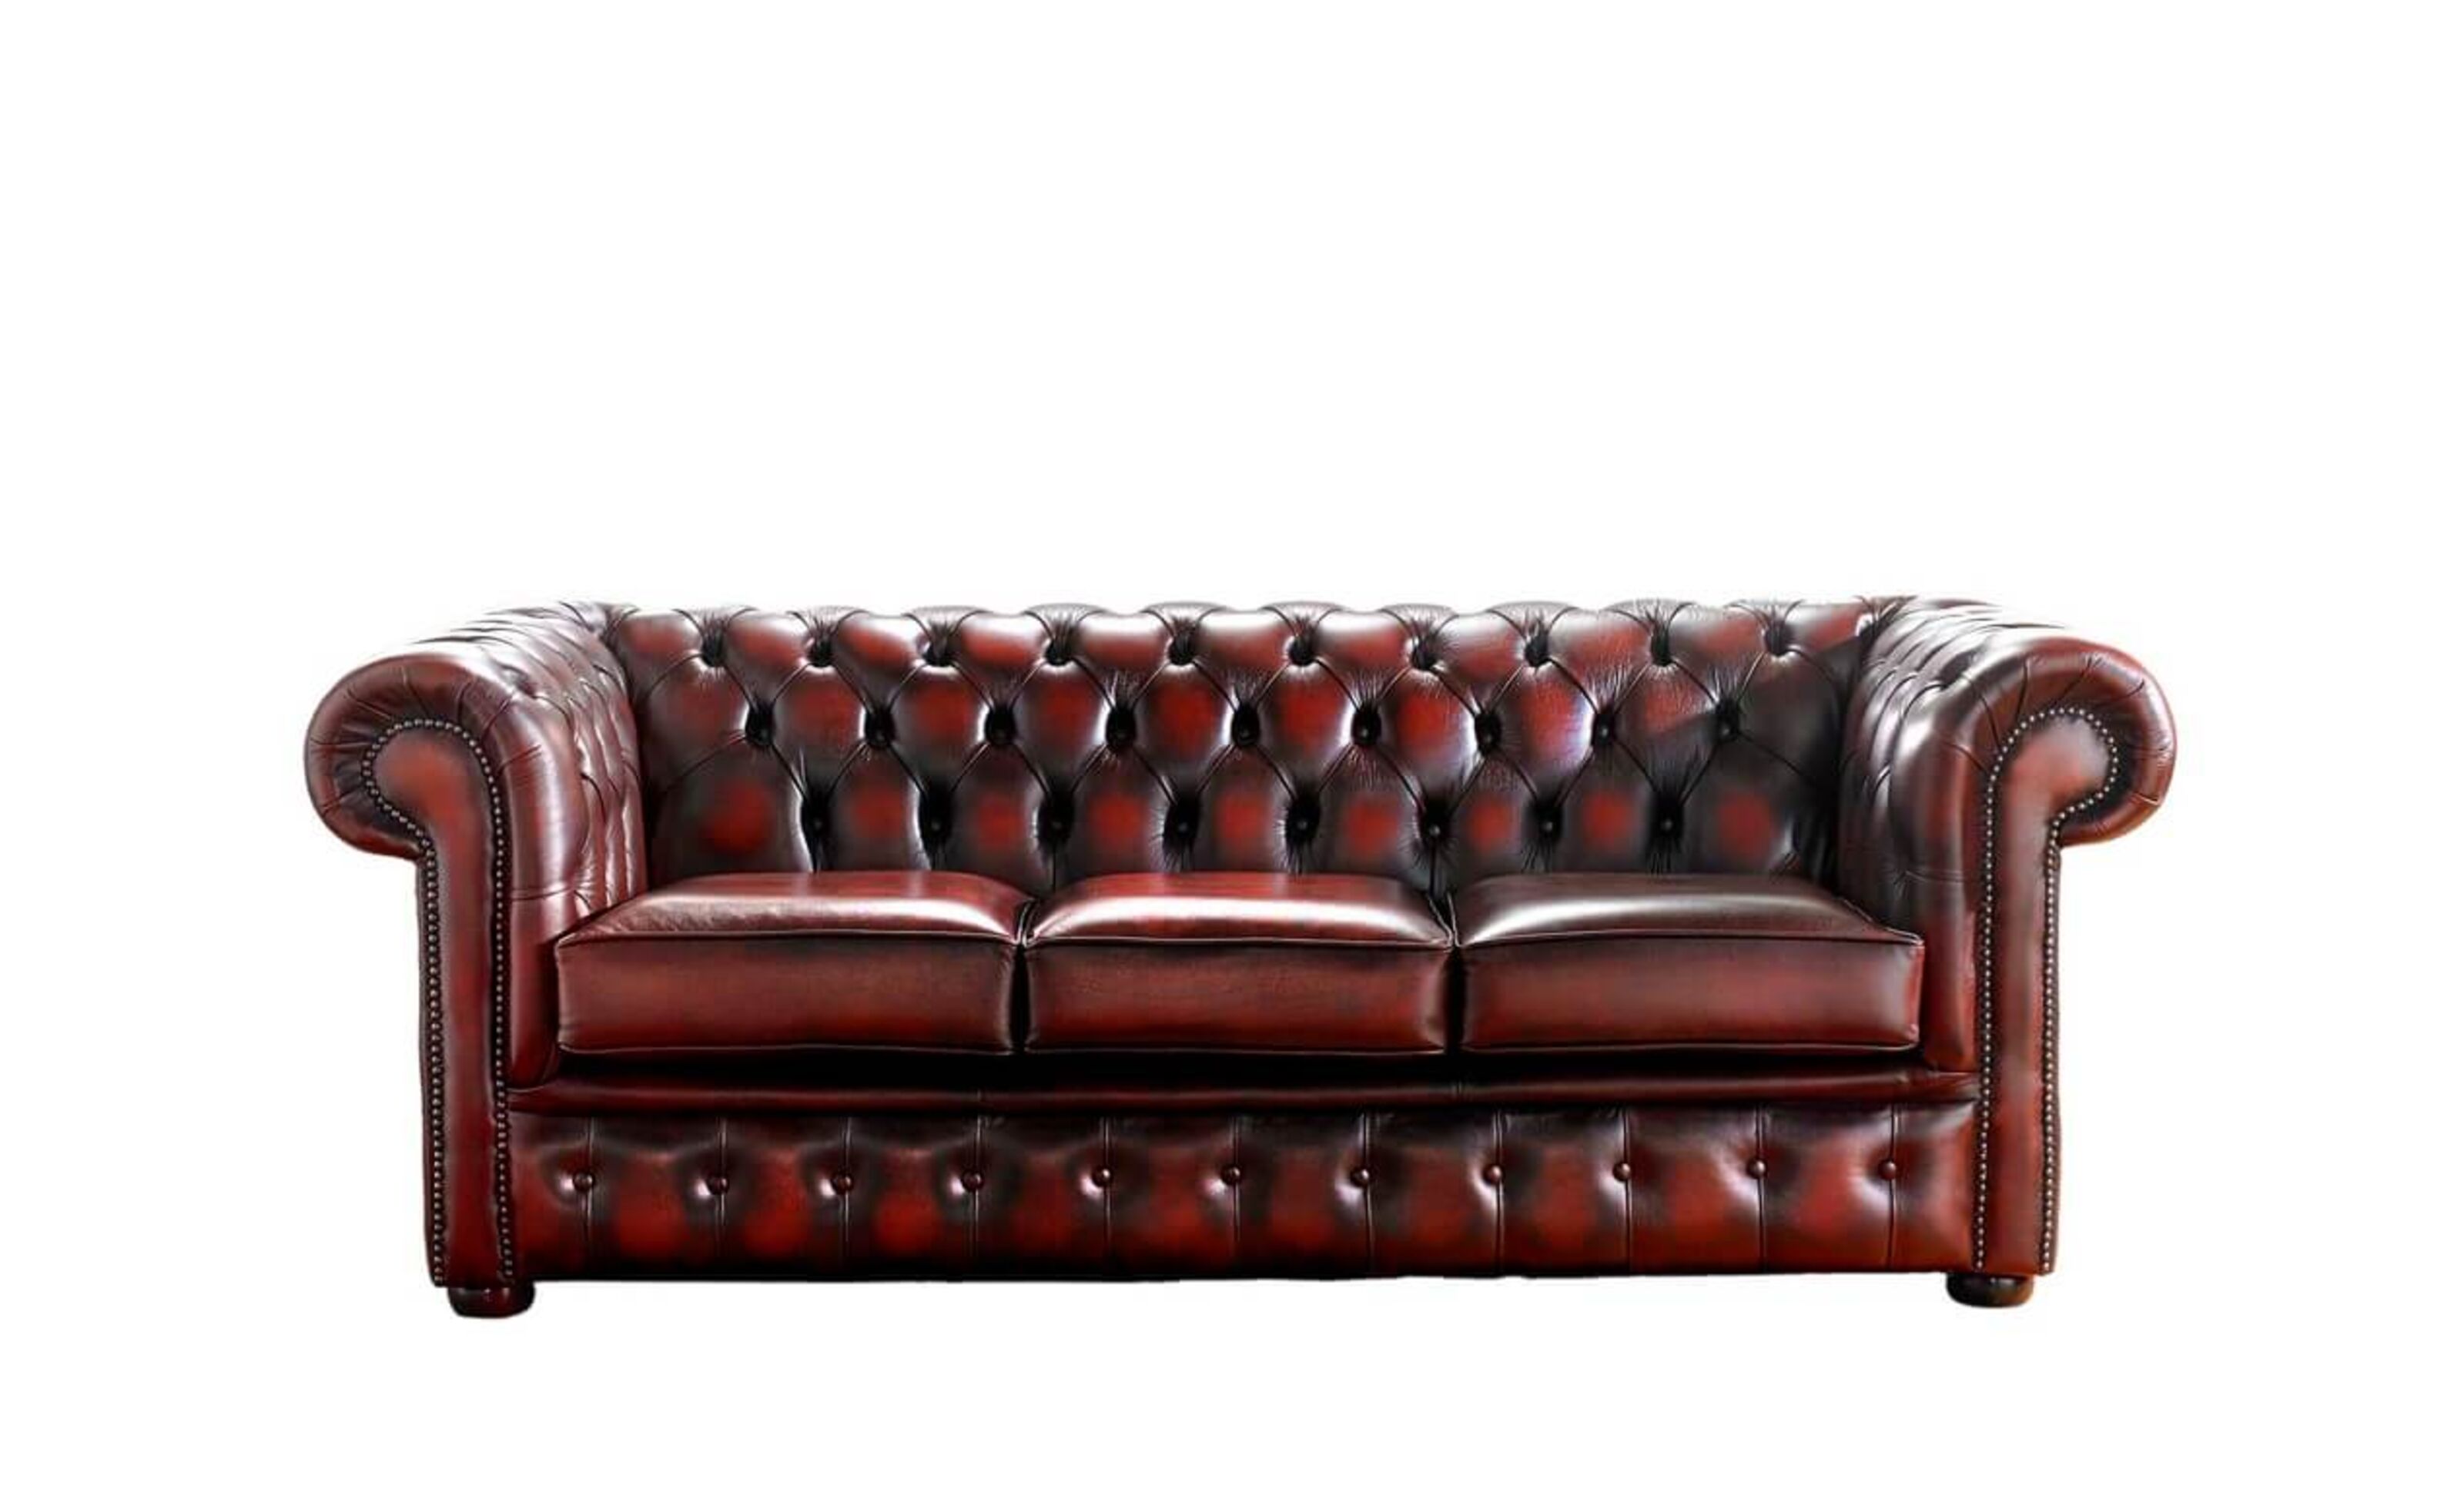 Oxblood Leather Chesterfield Sofa, Red Chesterfield Sofa Set